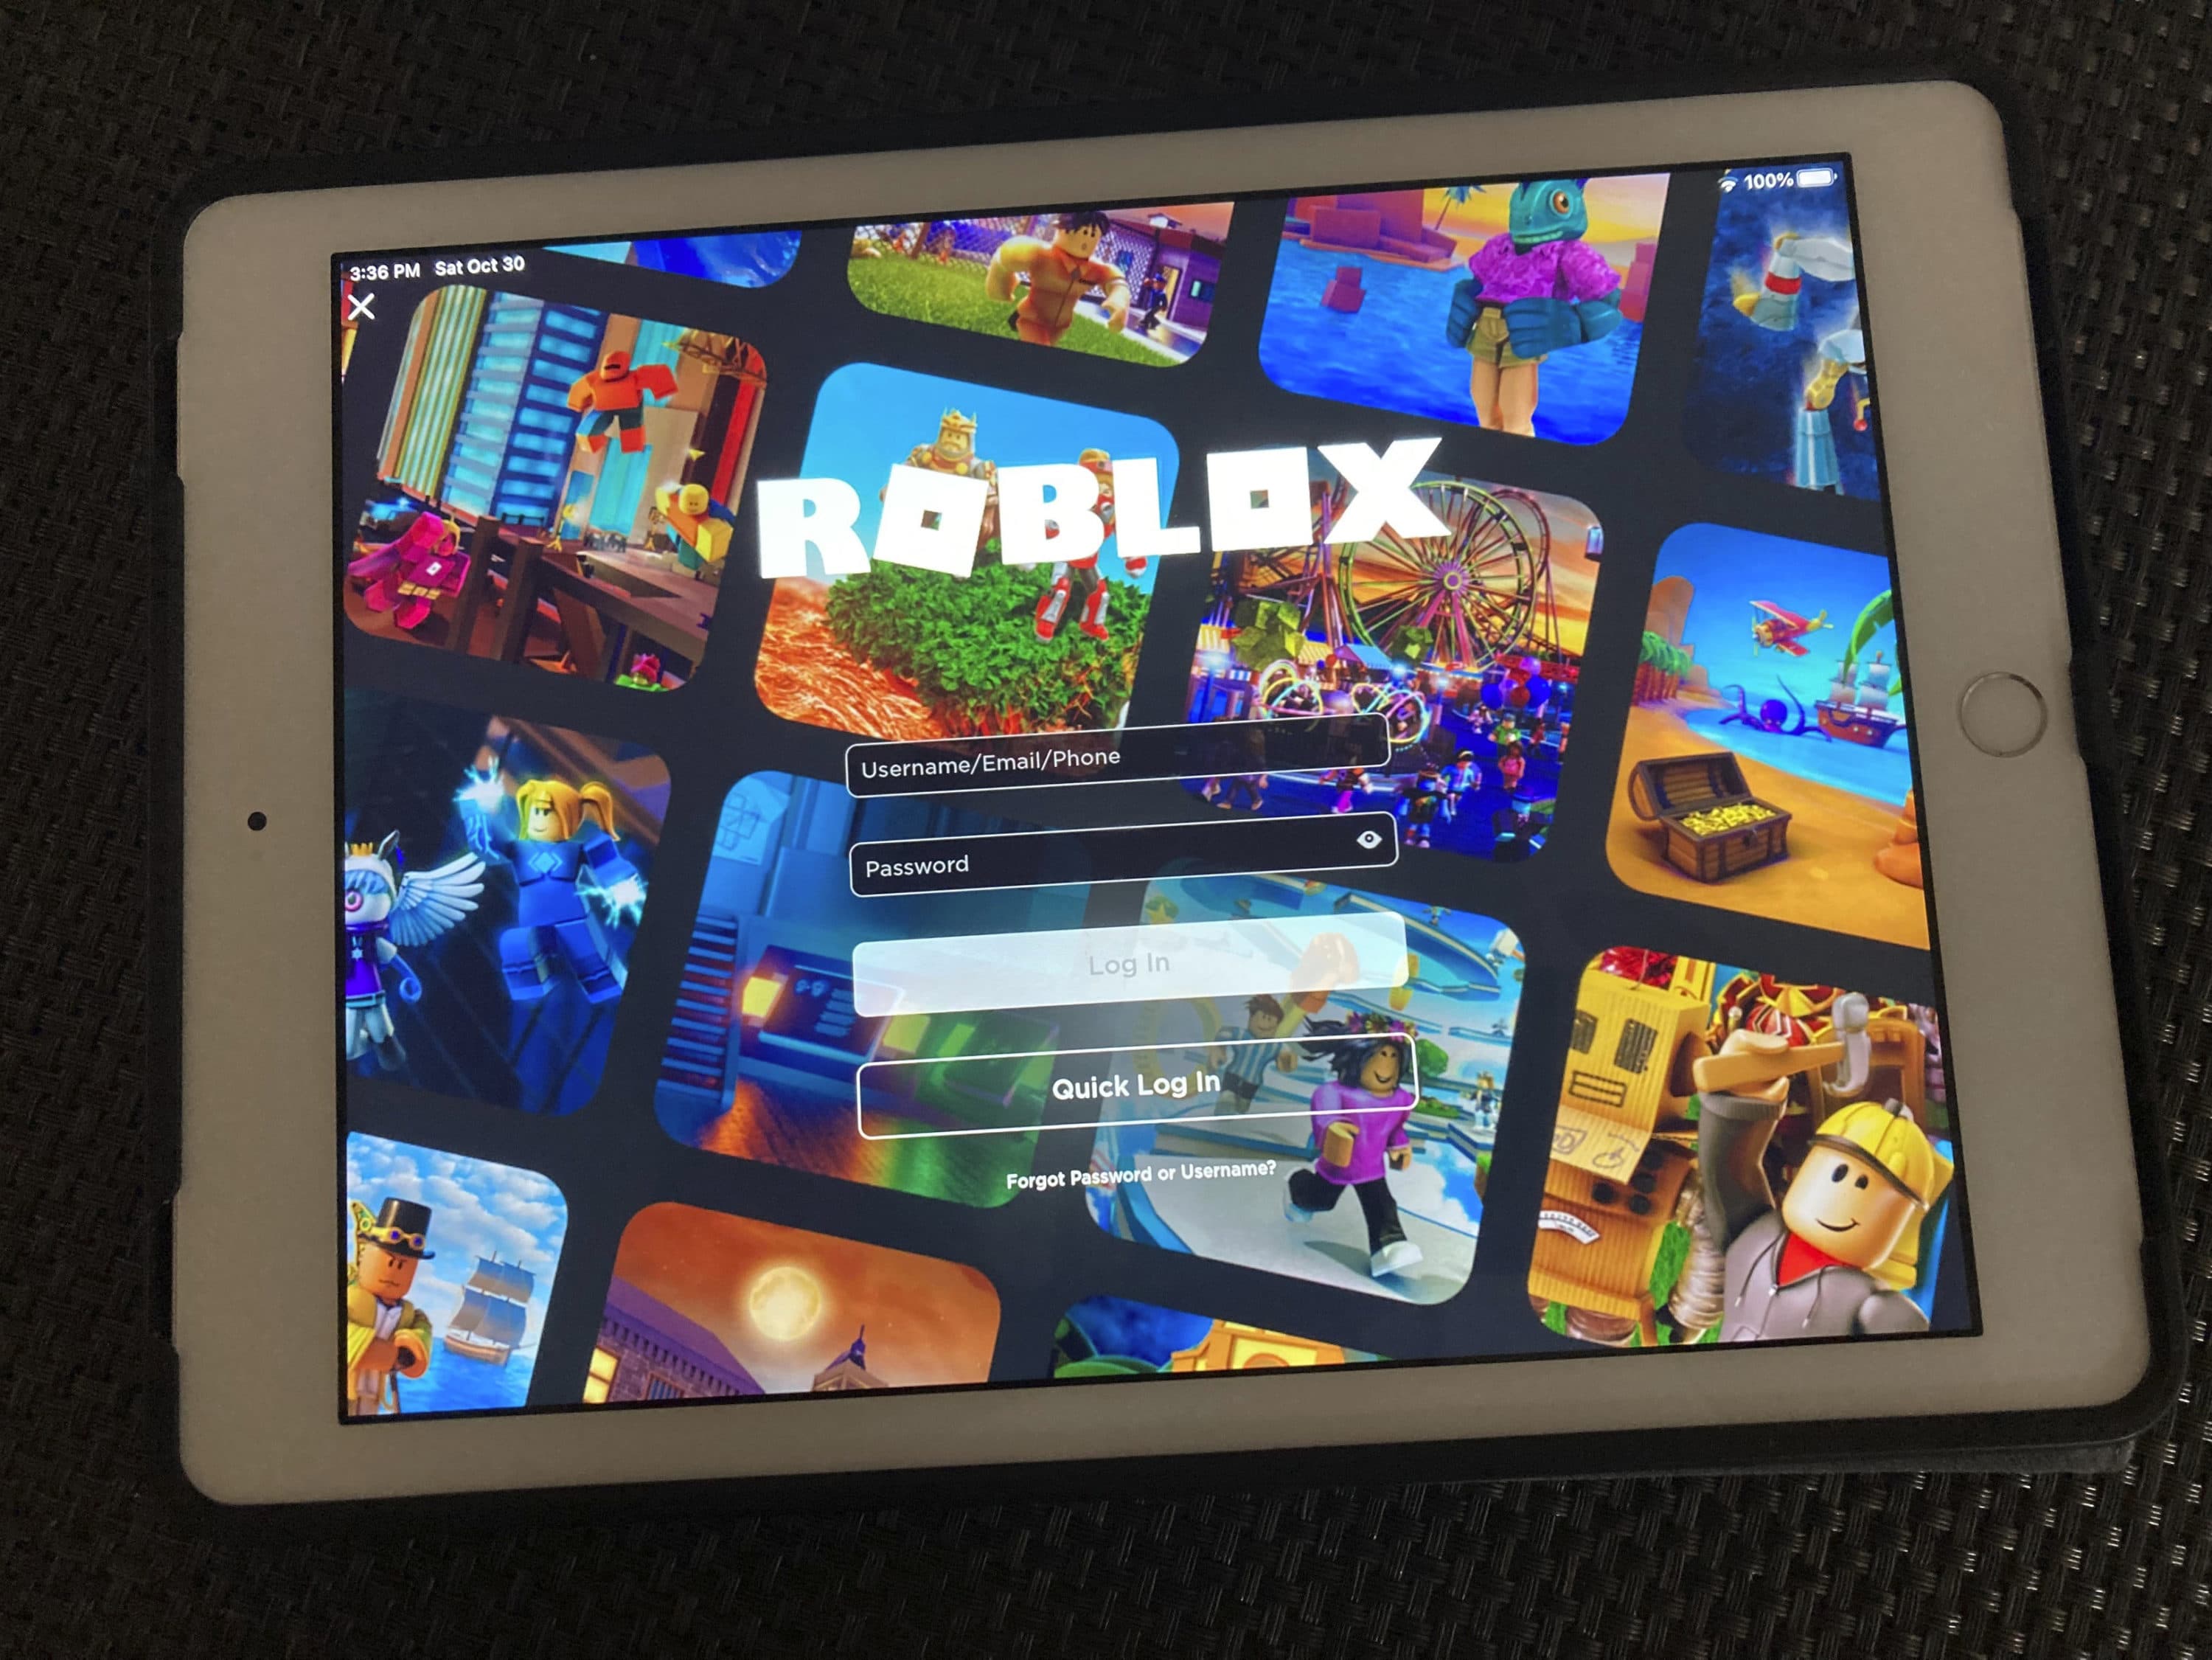 Roblox down live updates - Nightmare FAR from over as major outages still  being reported 16 hours after game crashed